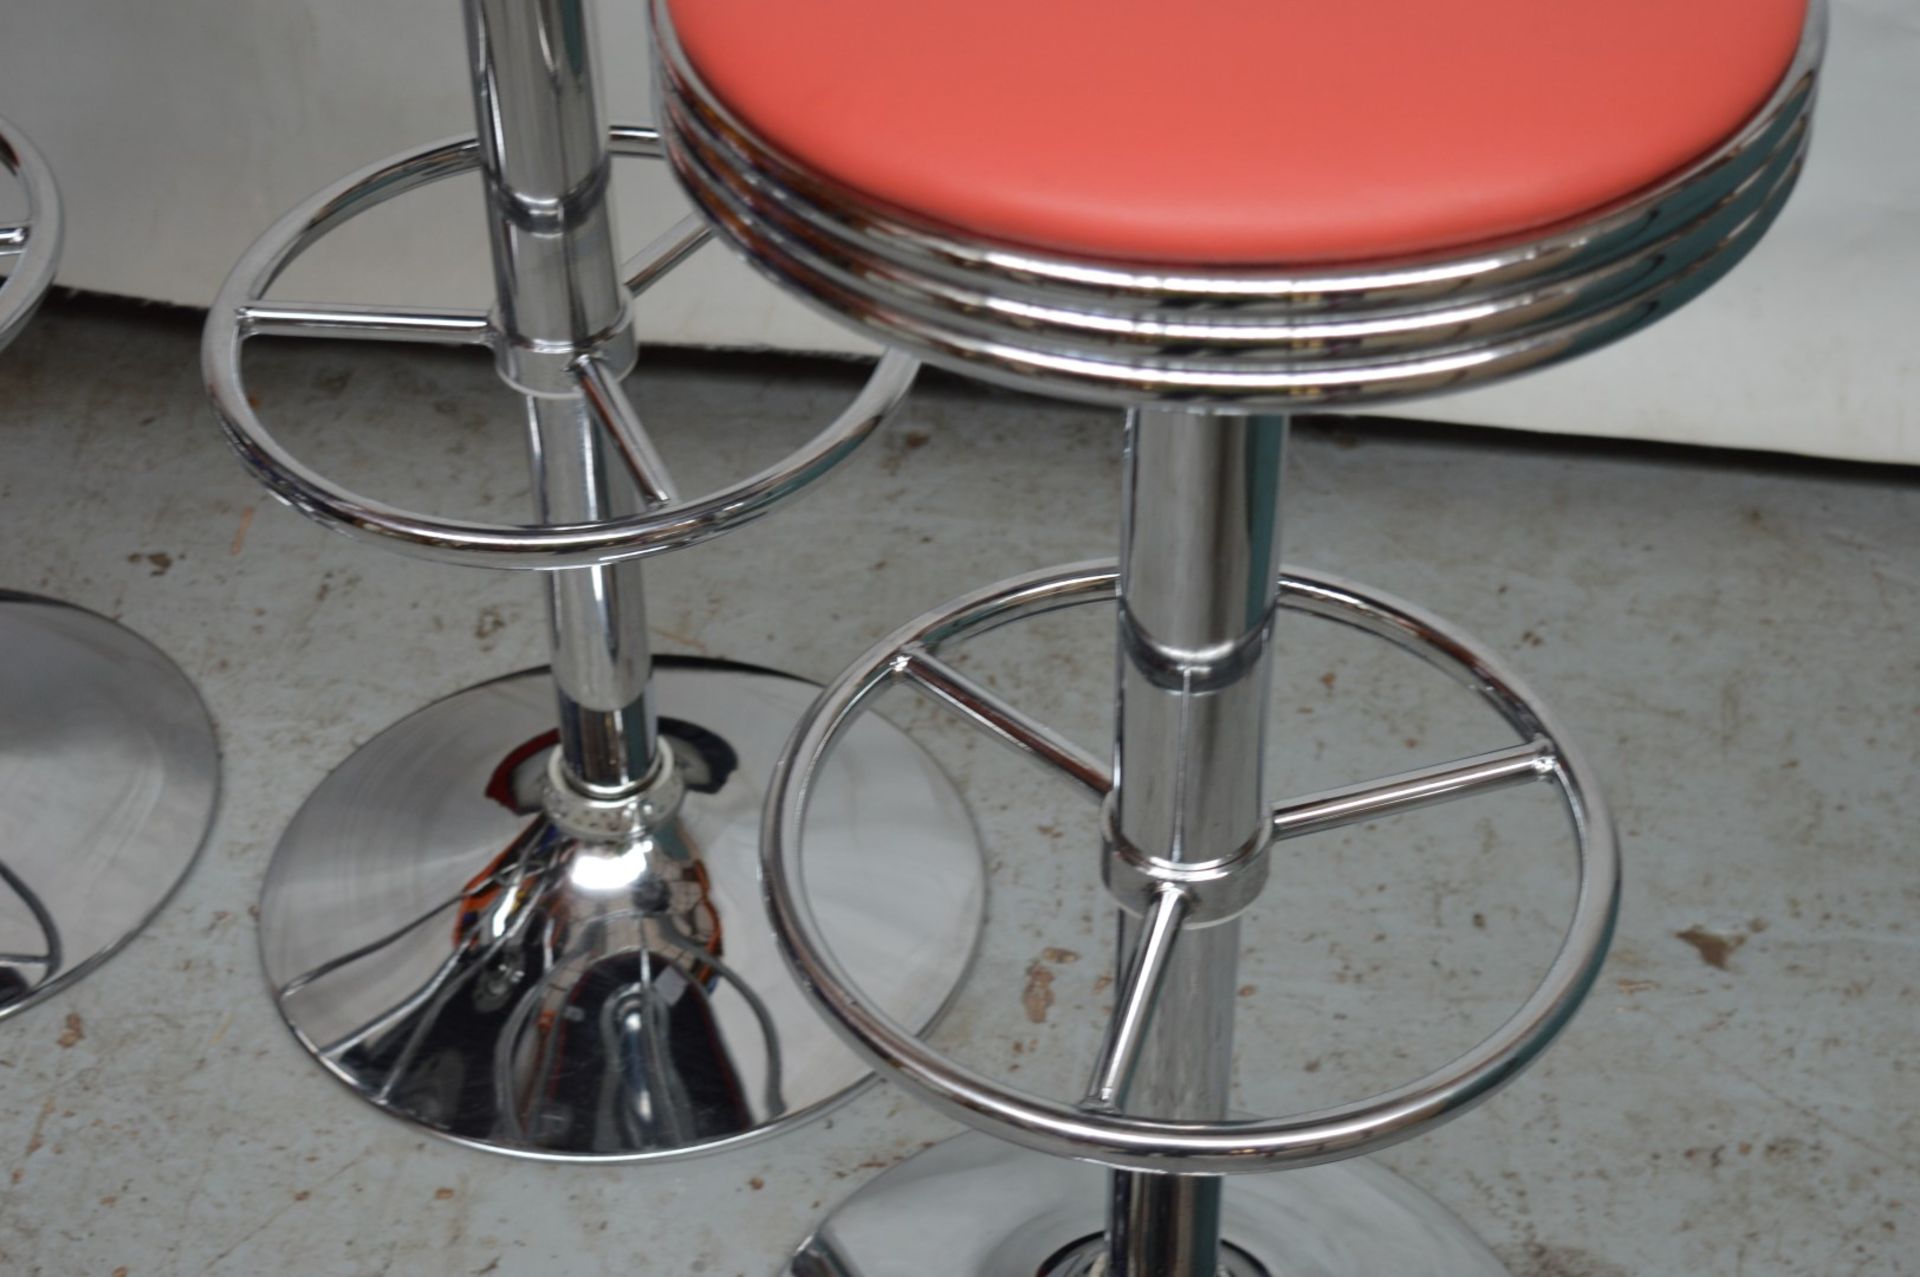 4 x Retro American Roadside Diner Themed Gas Lift Bar Stools - CL164 - Fantastic Stools With Full - Image 8 of 14